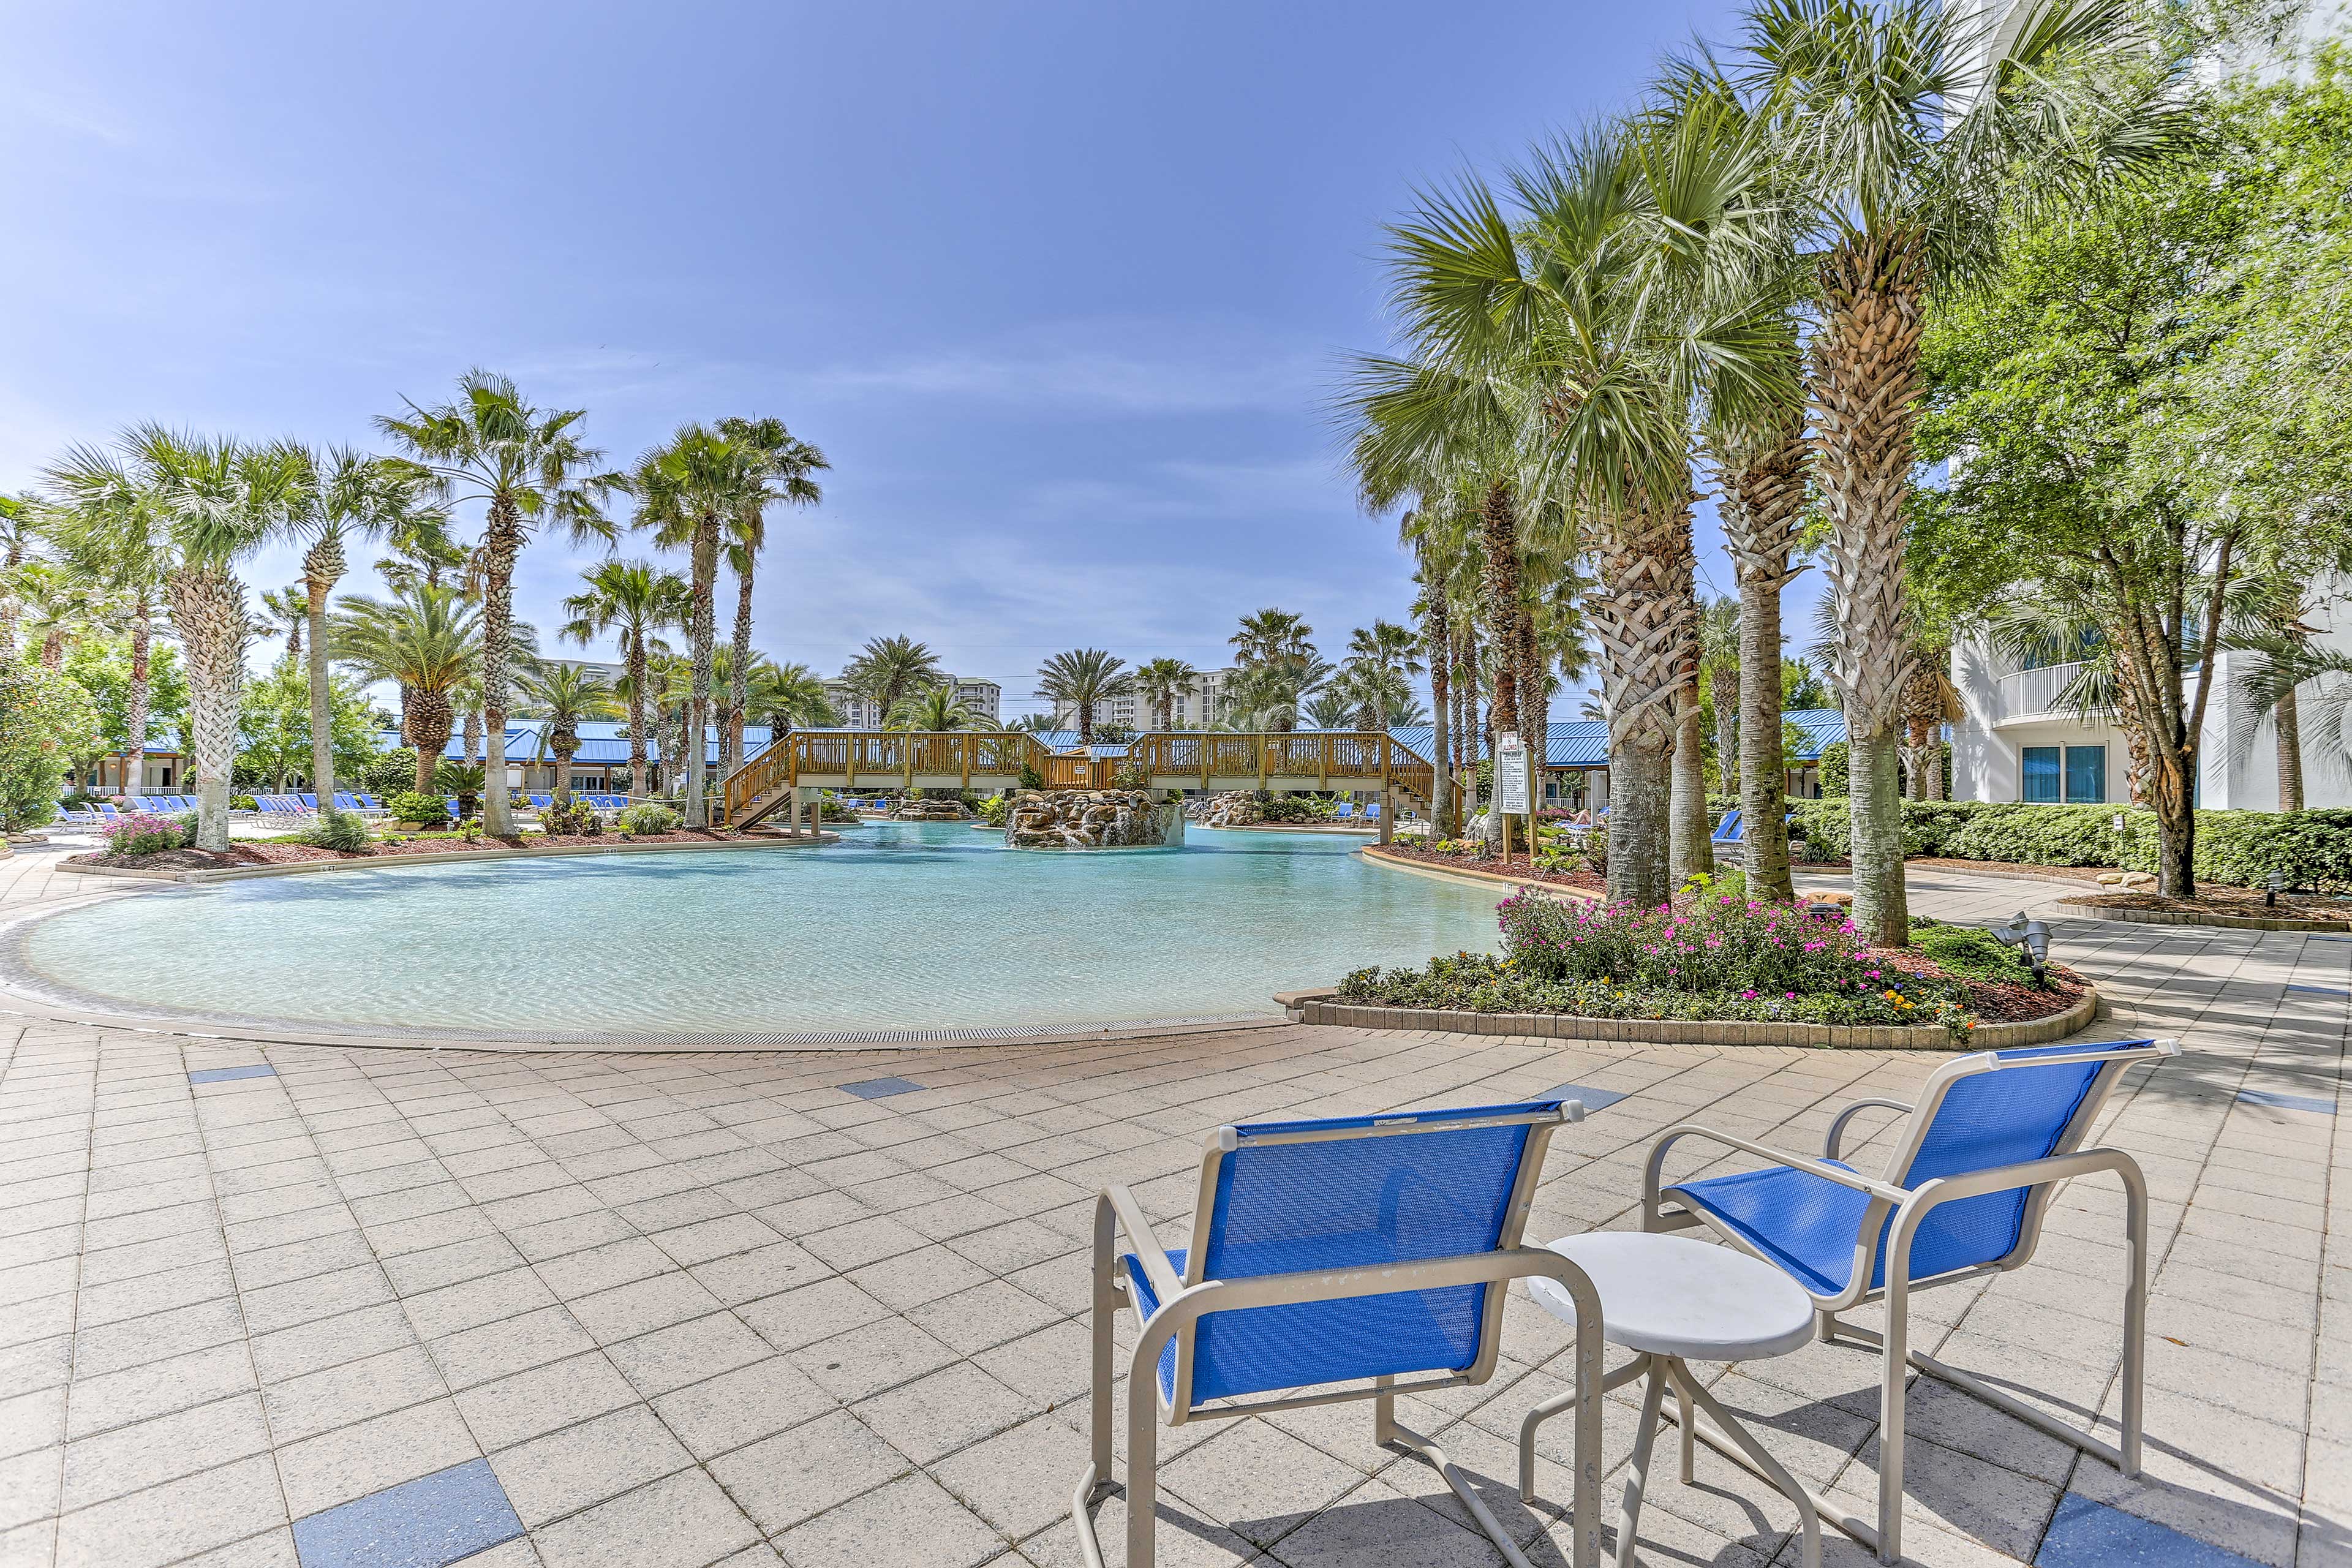 Snag a seat around the pool and catch a tan while watching the action!